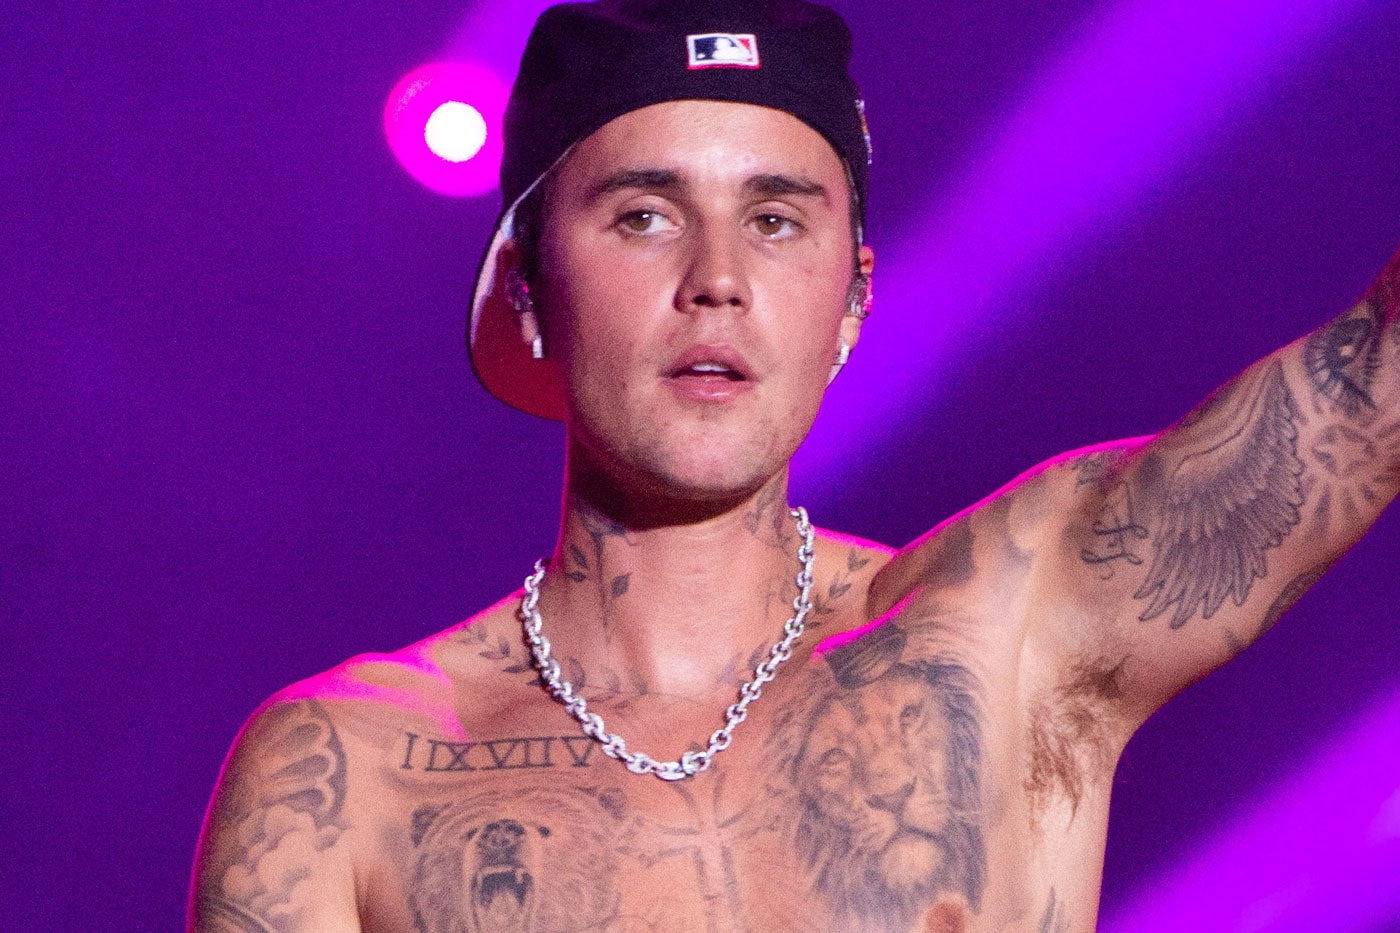 Watch Justin Bieber Give Drake's "Hotline Bling" an Acoustic Cover